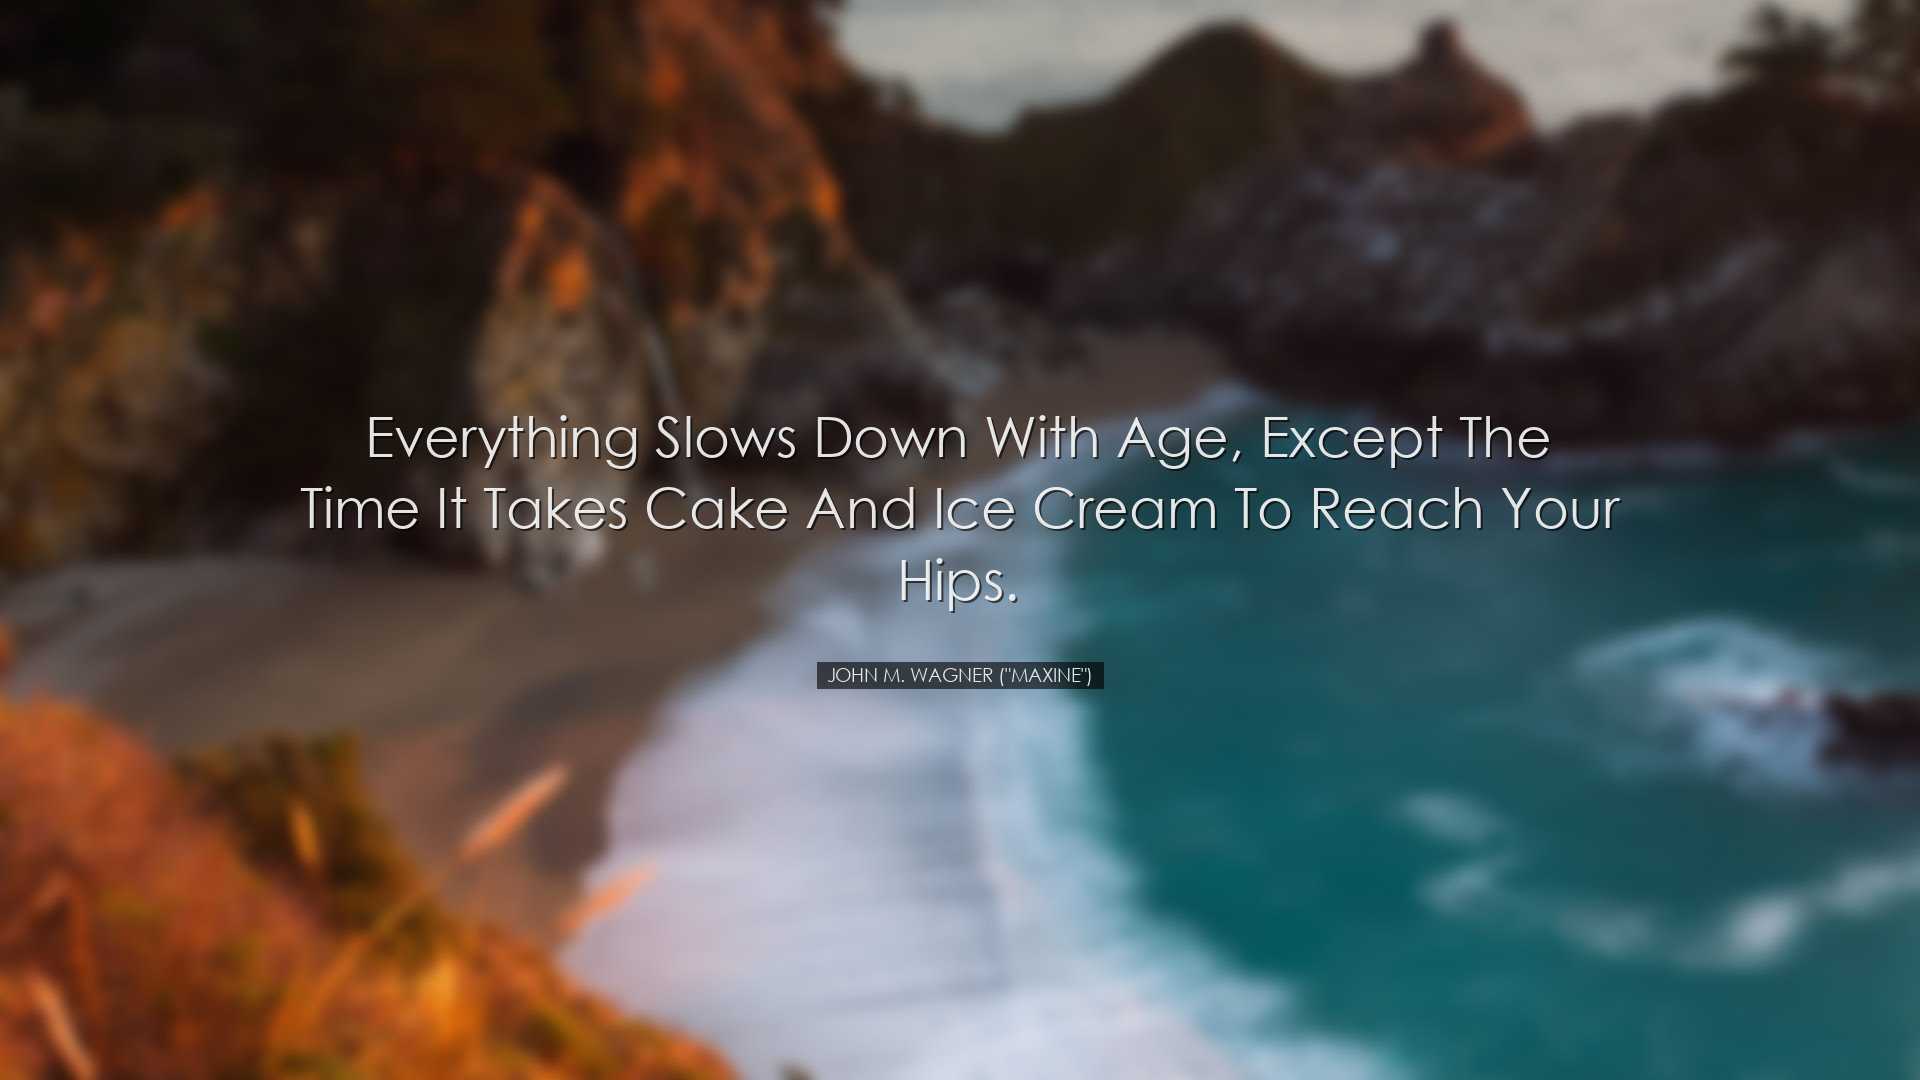 Everything slows down with age, except the time it takes cake and